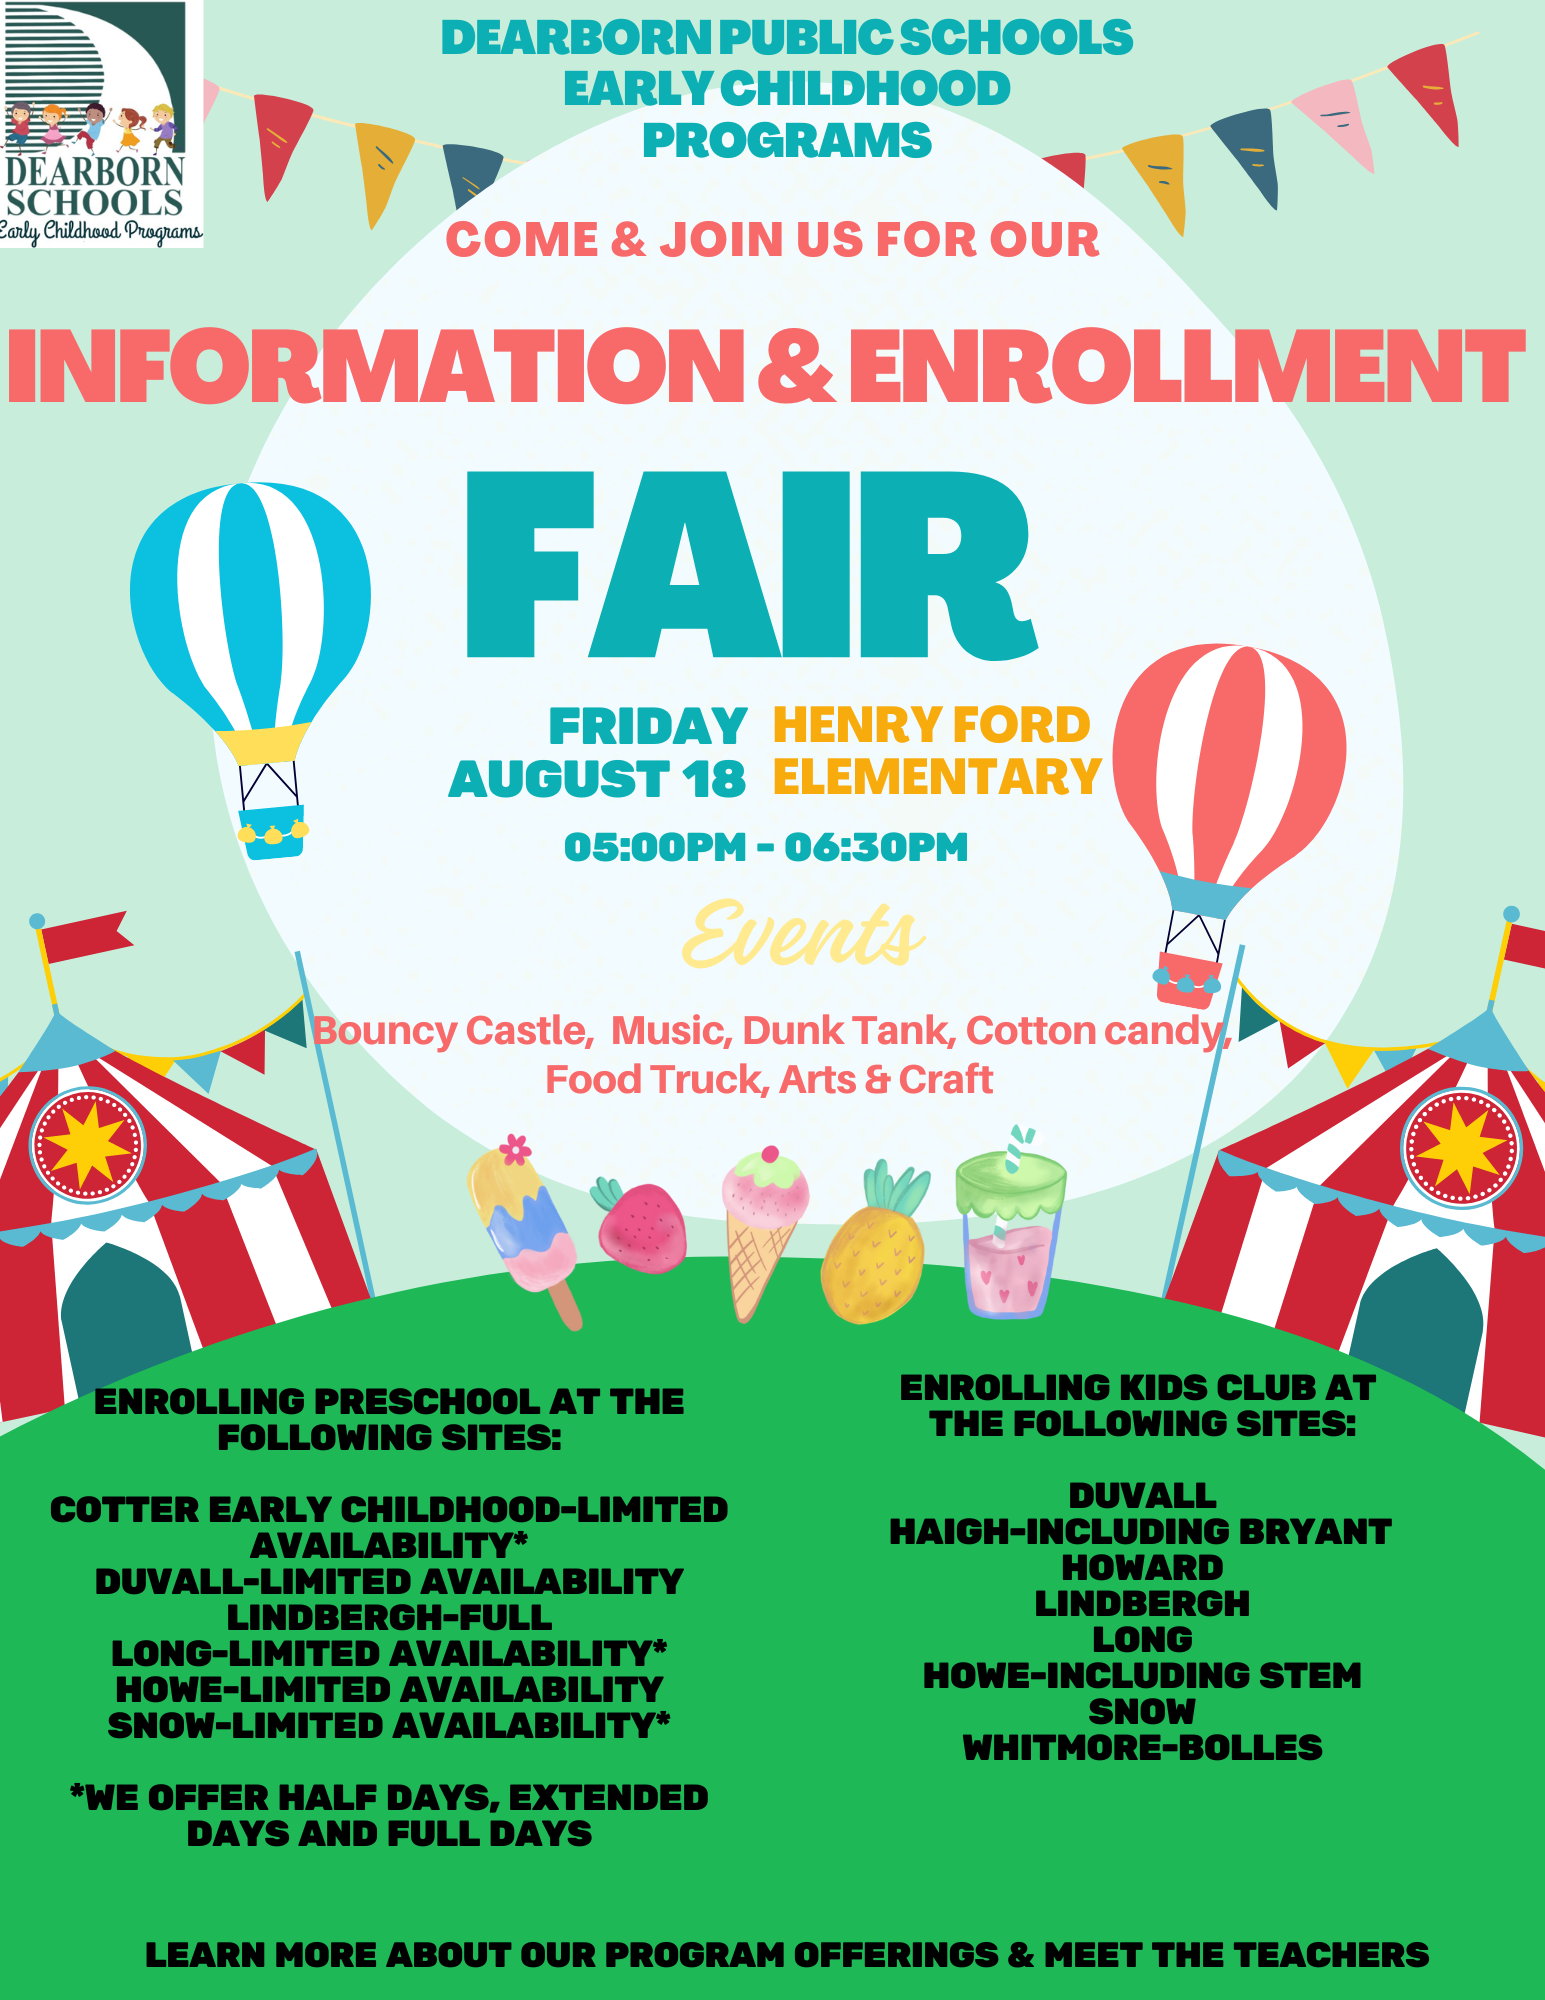 Flyer - Dearborn Public Schools Early Childhood Programs Come & Join us for our Information and Enrollment Fair. Friday, Aug. 18 5 p.m. to 6:30 p.m. Events bouncy castle, music, dunk tank, cotton candy, food truck, arts & craft Enrolling preschool at the following sites: Cotter Early Childhood-limited availability, Duvall - limited availability, Lindbergh - full, Long -limited availability, Howe - limited availability, Snow - limited availability. We offer half days, extended days and full days. Enrolling Kids Club at the following sites: Duvall, Haigh - including Bryant, Howard, Lindbergh, Long, Howe-including STEM, Snow and Whitmore Bolles. Learn more about our program offerings and meet the teachers.